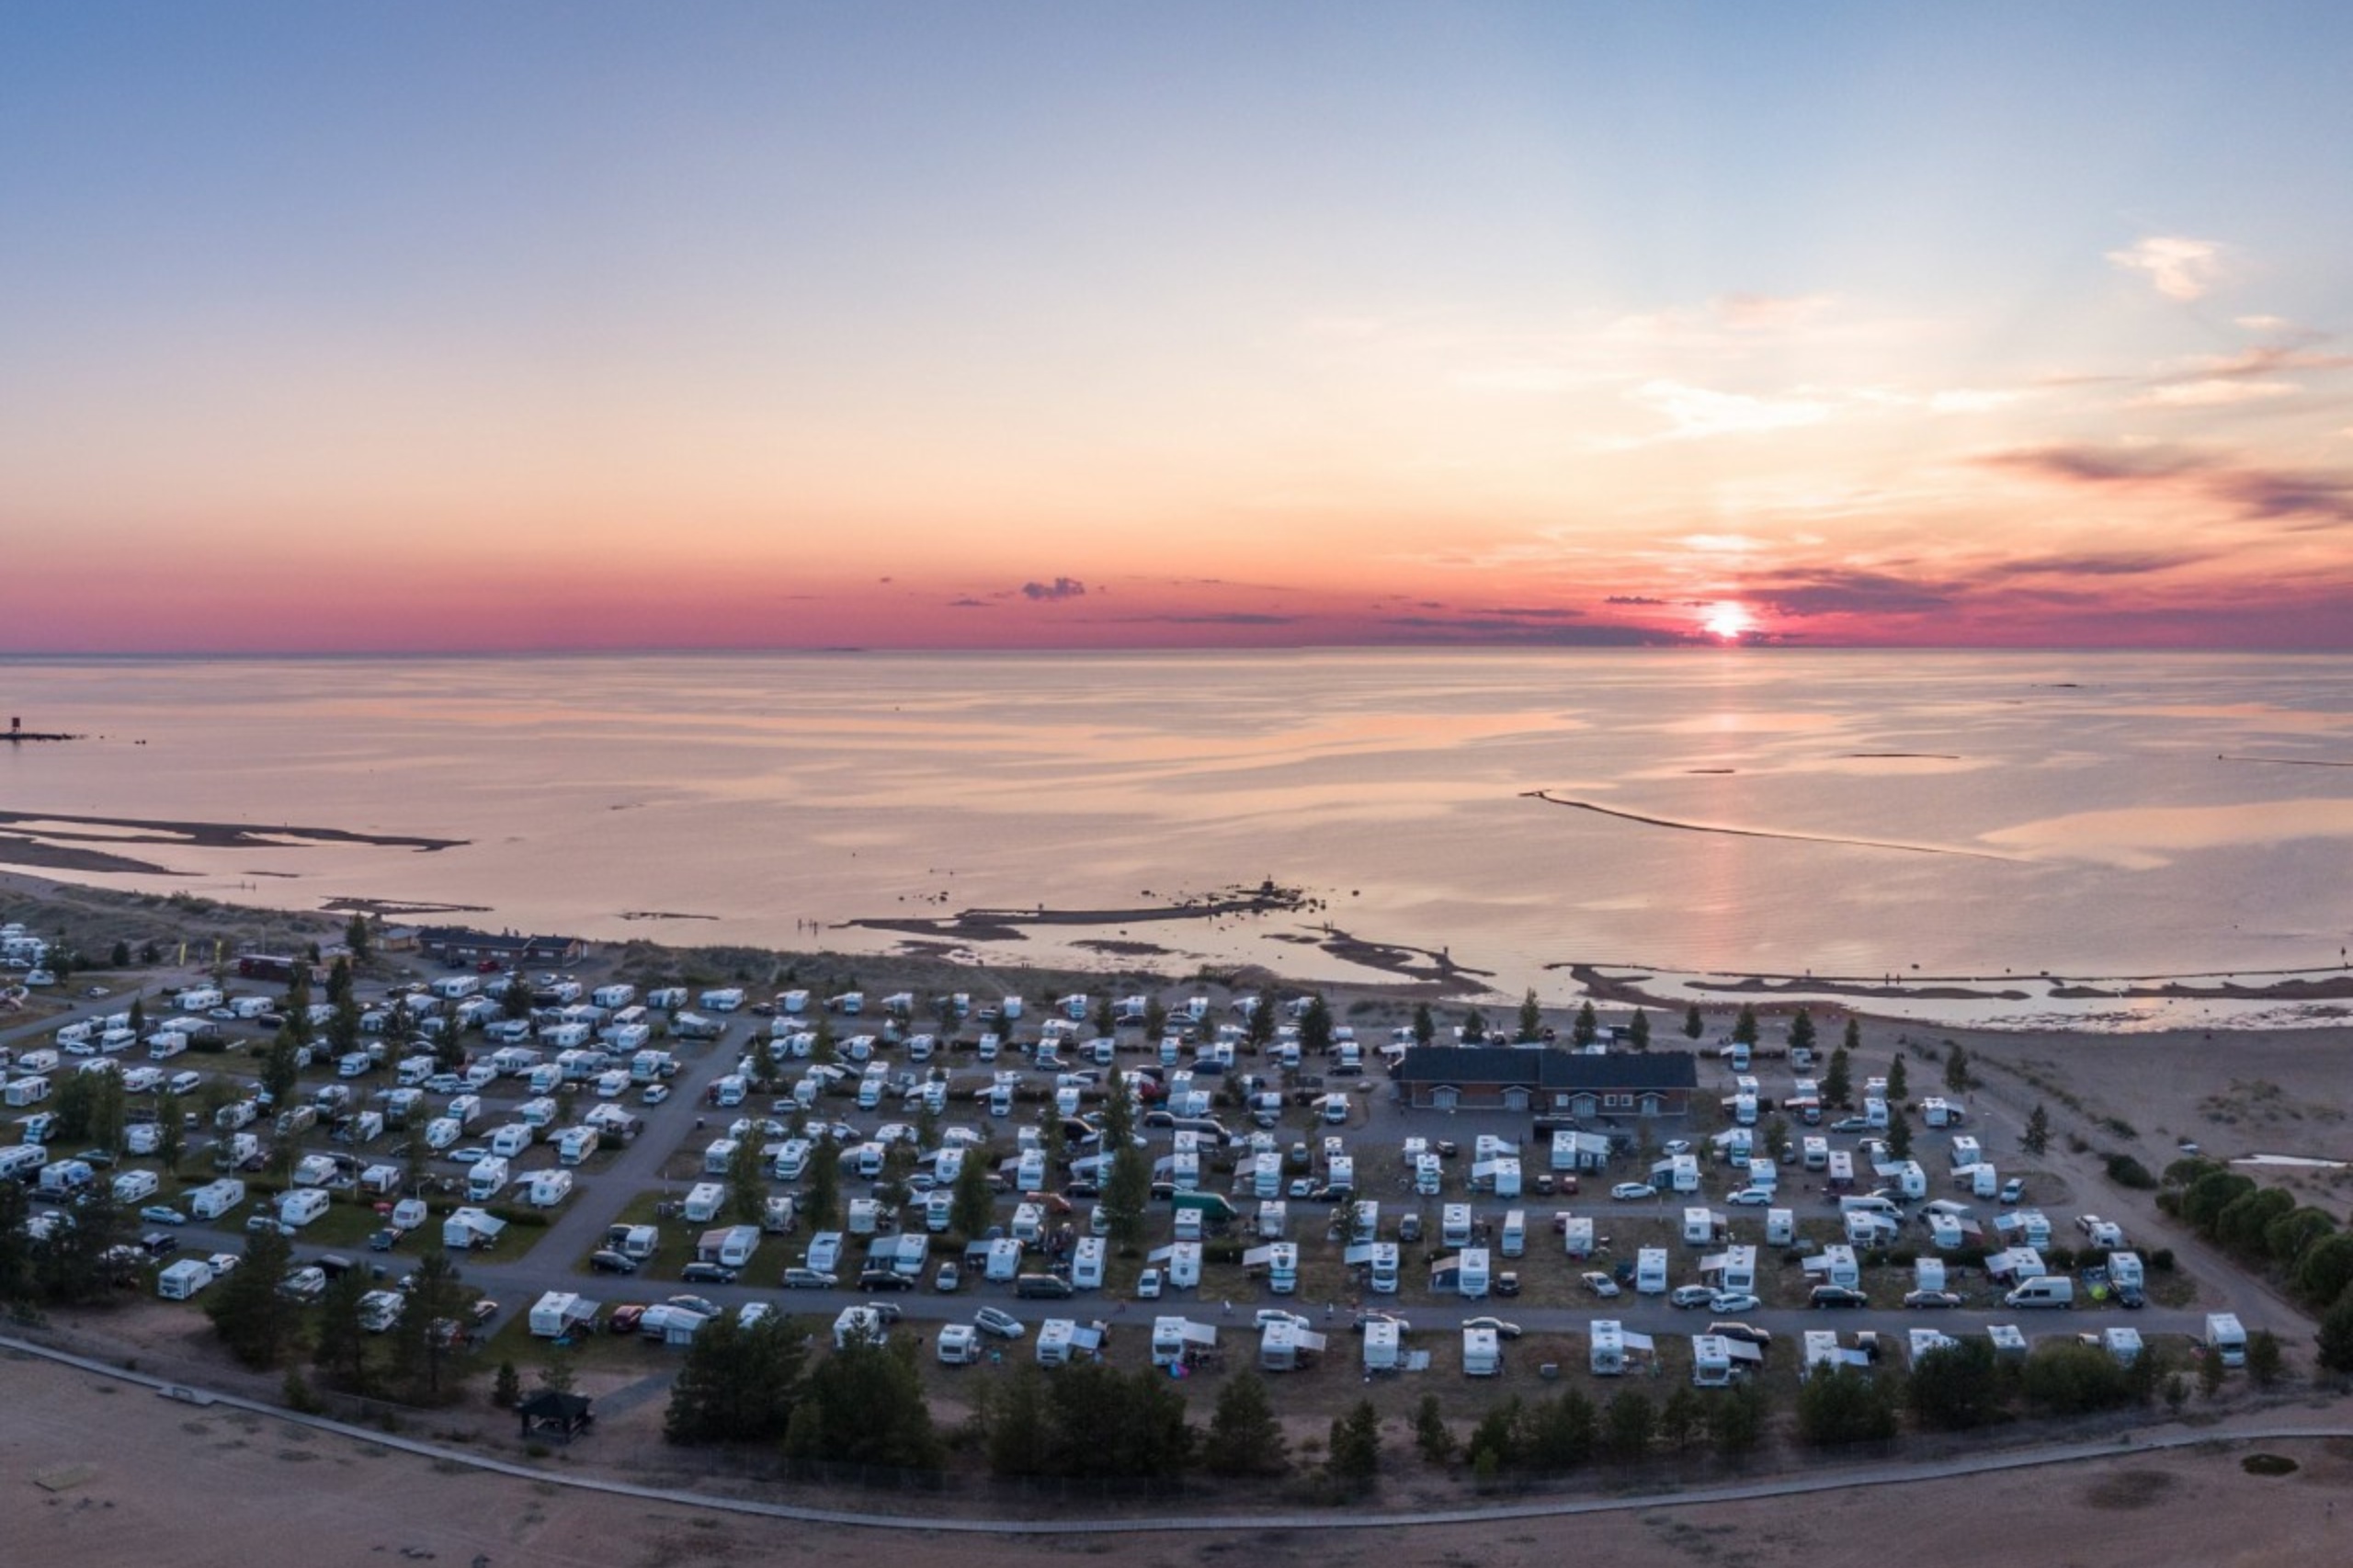 Beach and ocean as far as the eye can see. Kalajoki Camping is beautifully located by the beach. 